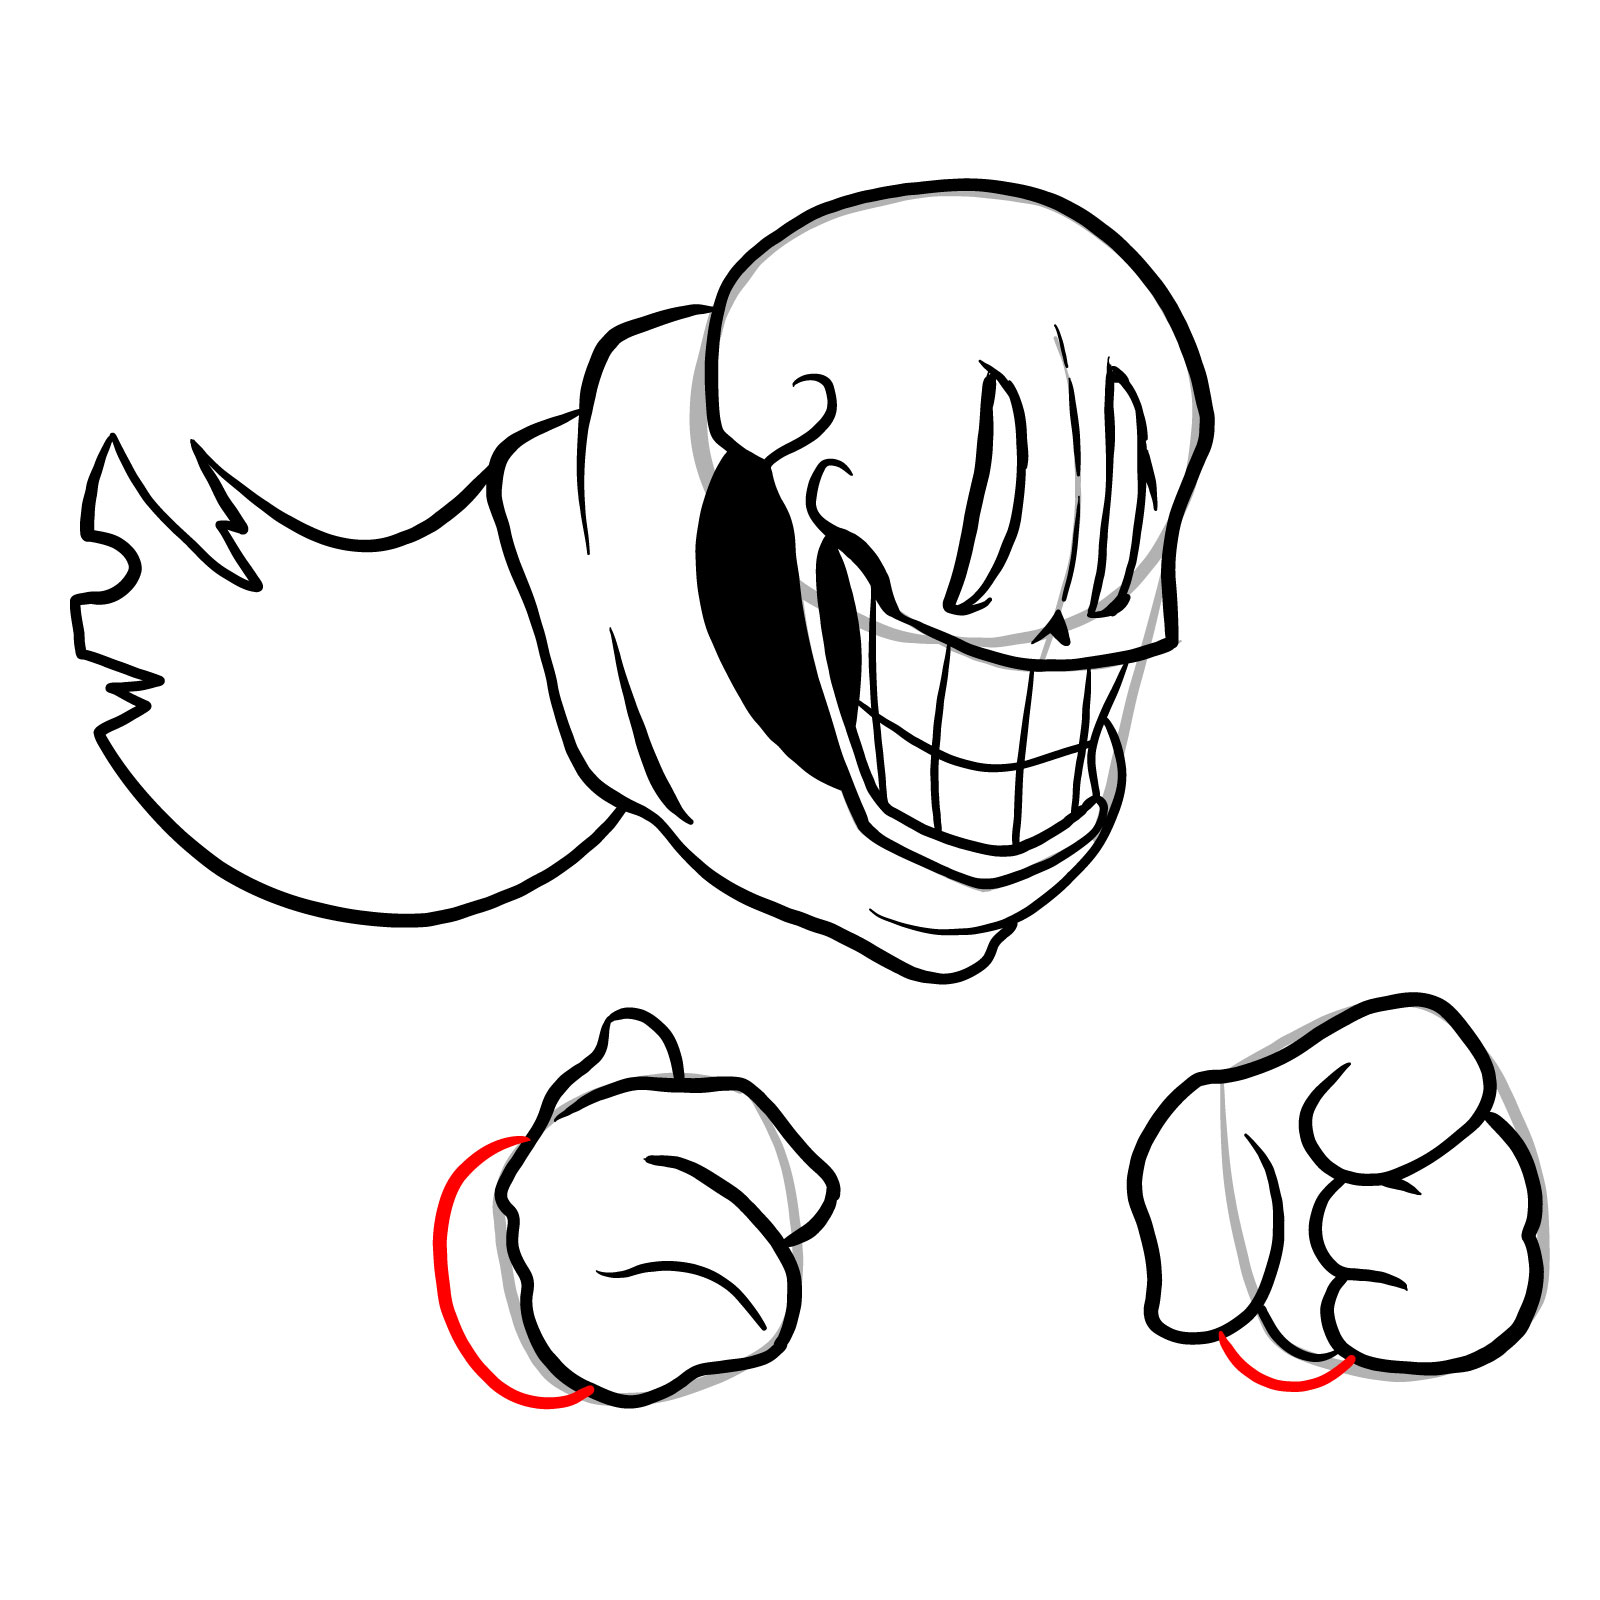 How to draw Phantom!Papyrus from FNF - step 20